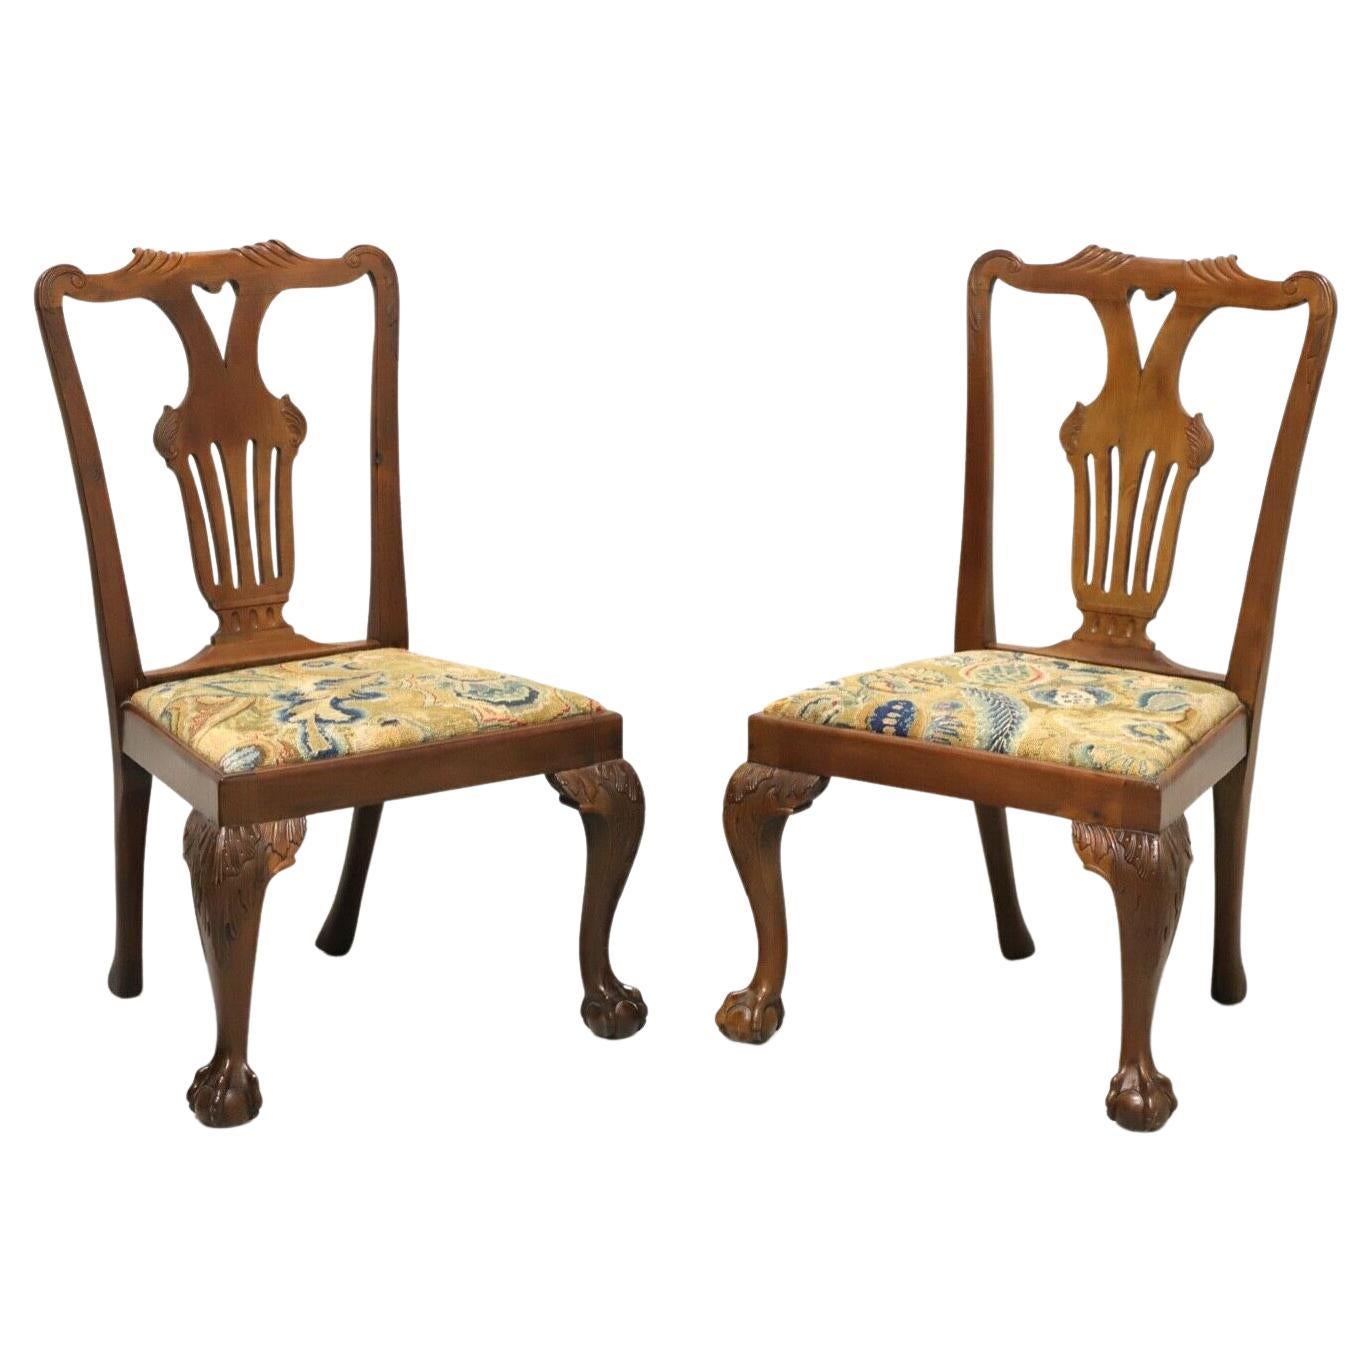 Antique 19th Century Carved Walnut Chippendale Ball n Claw Dining Chairs - Pair